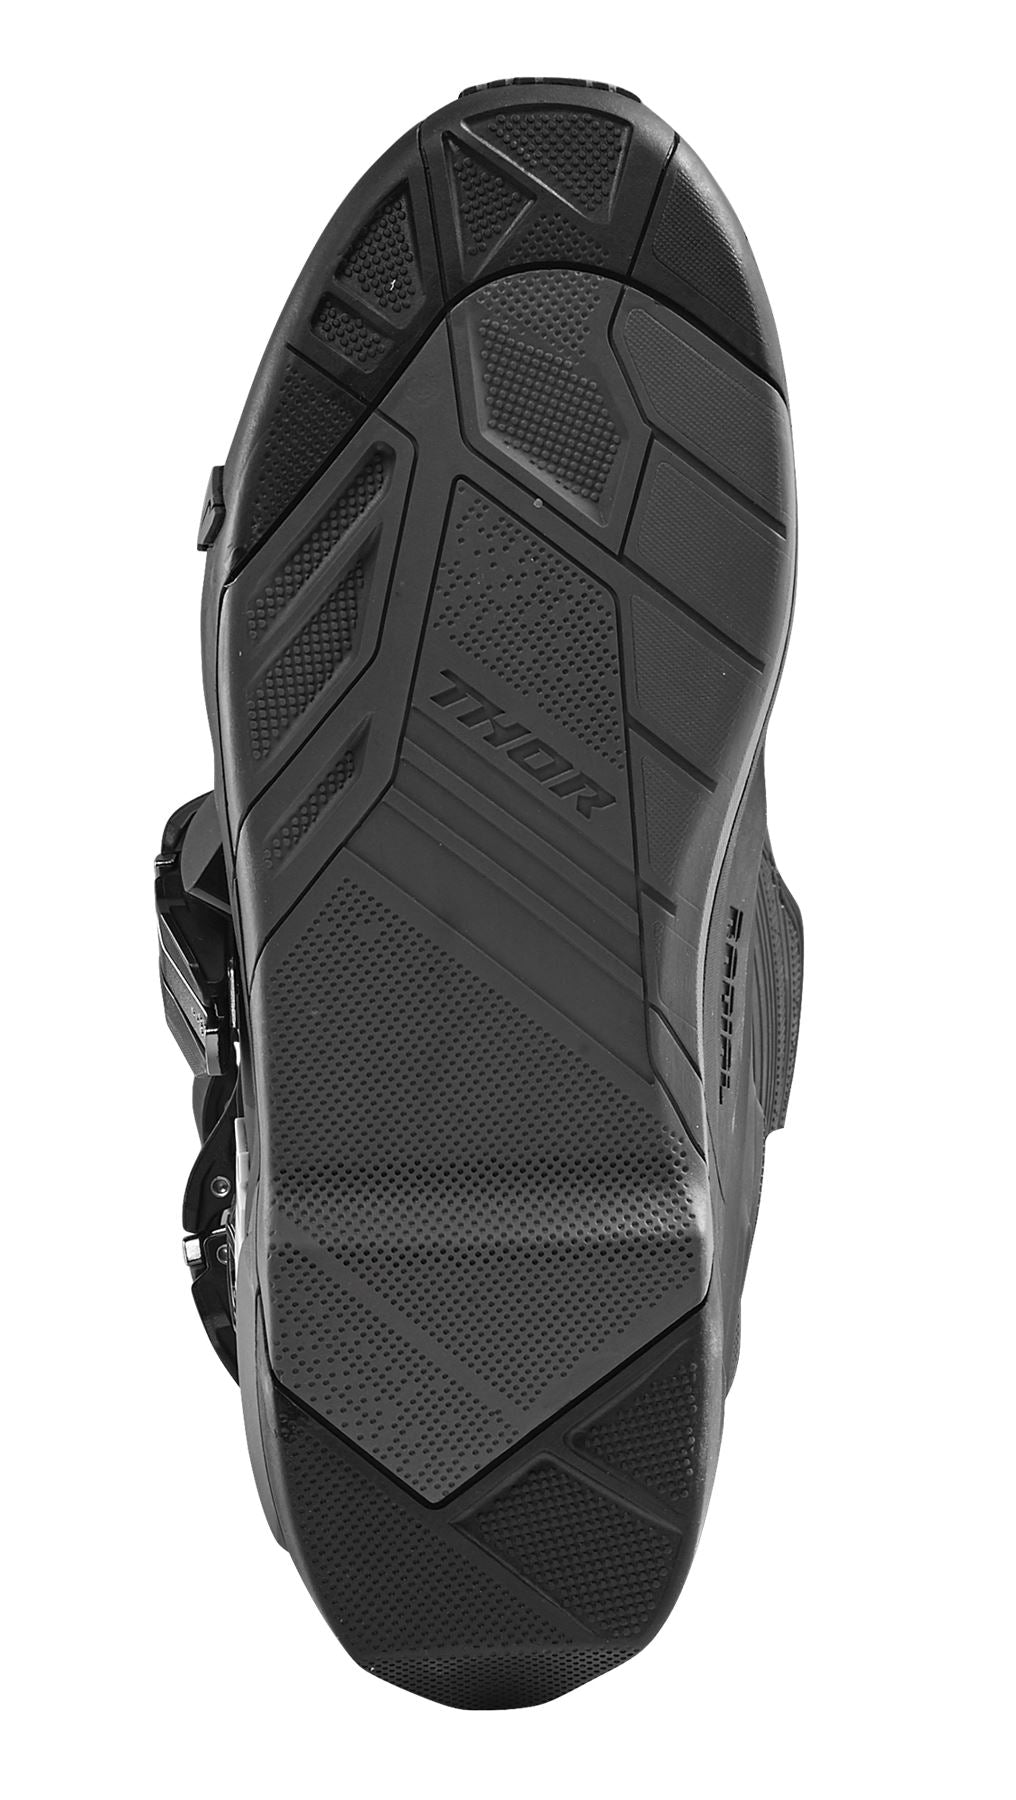 Thor 2024 Motocross Boots Radial Black Red